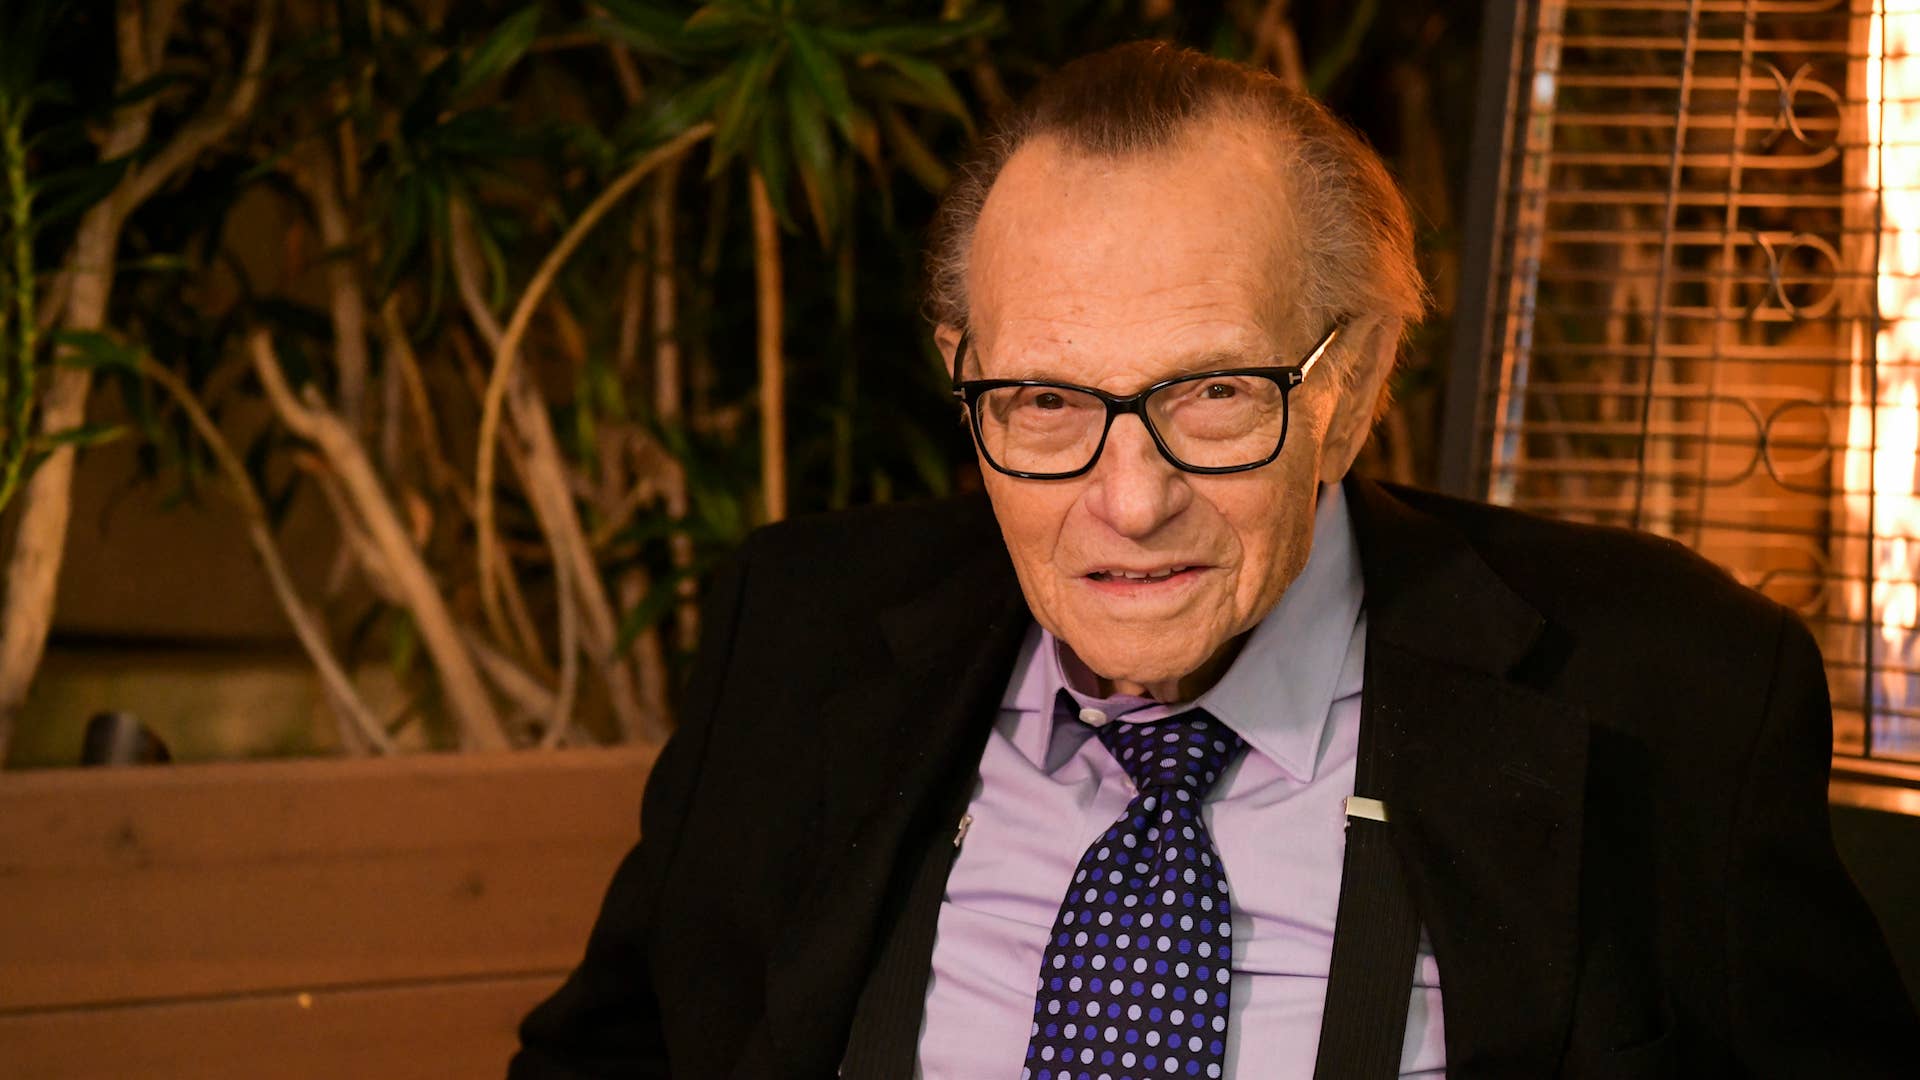 Larry King poses for portrait as the Friars Club